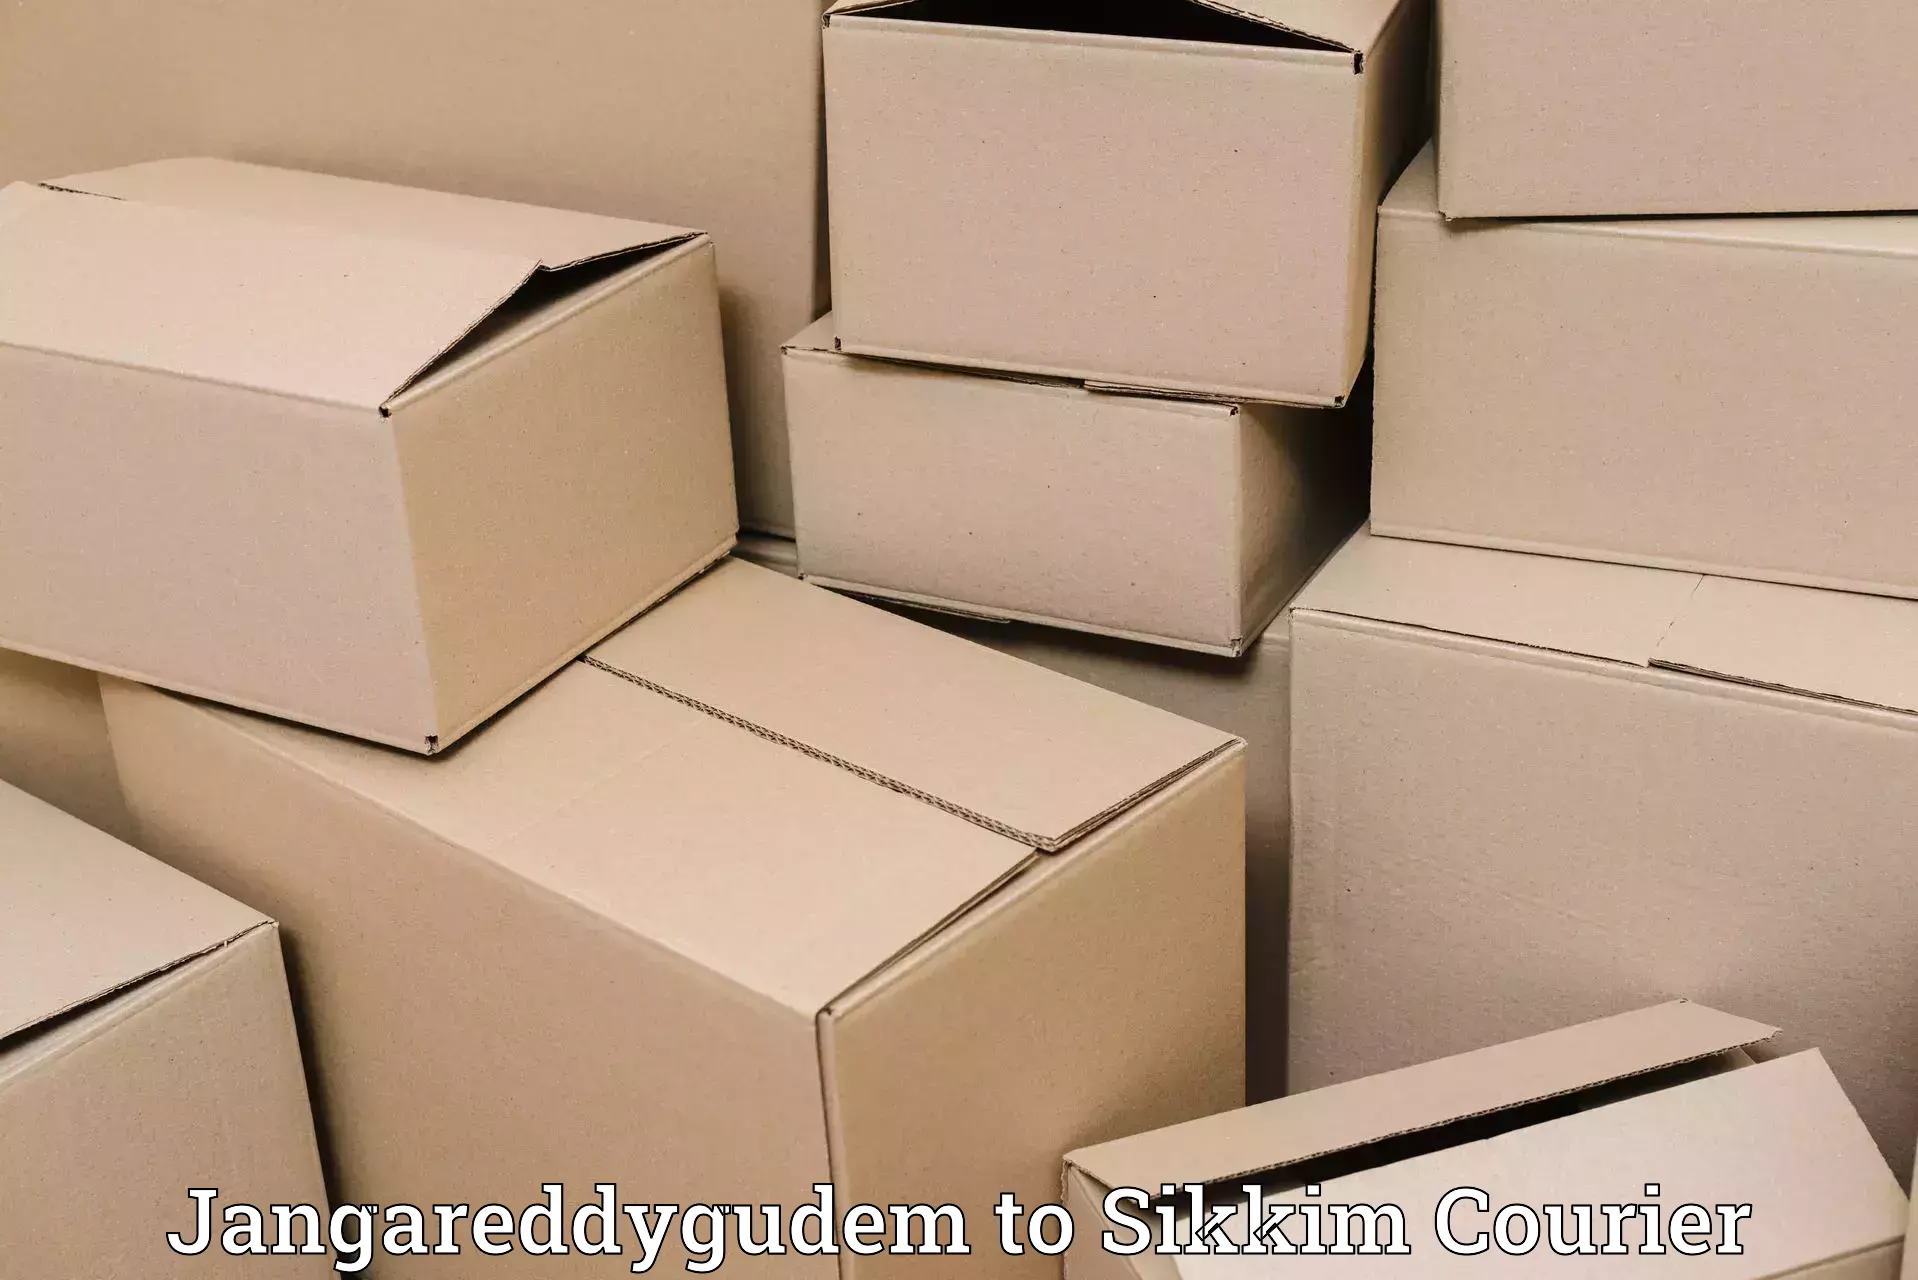 Reliable courier services Jangareddygudem to Pelling